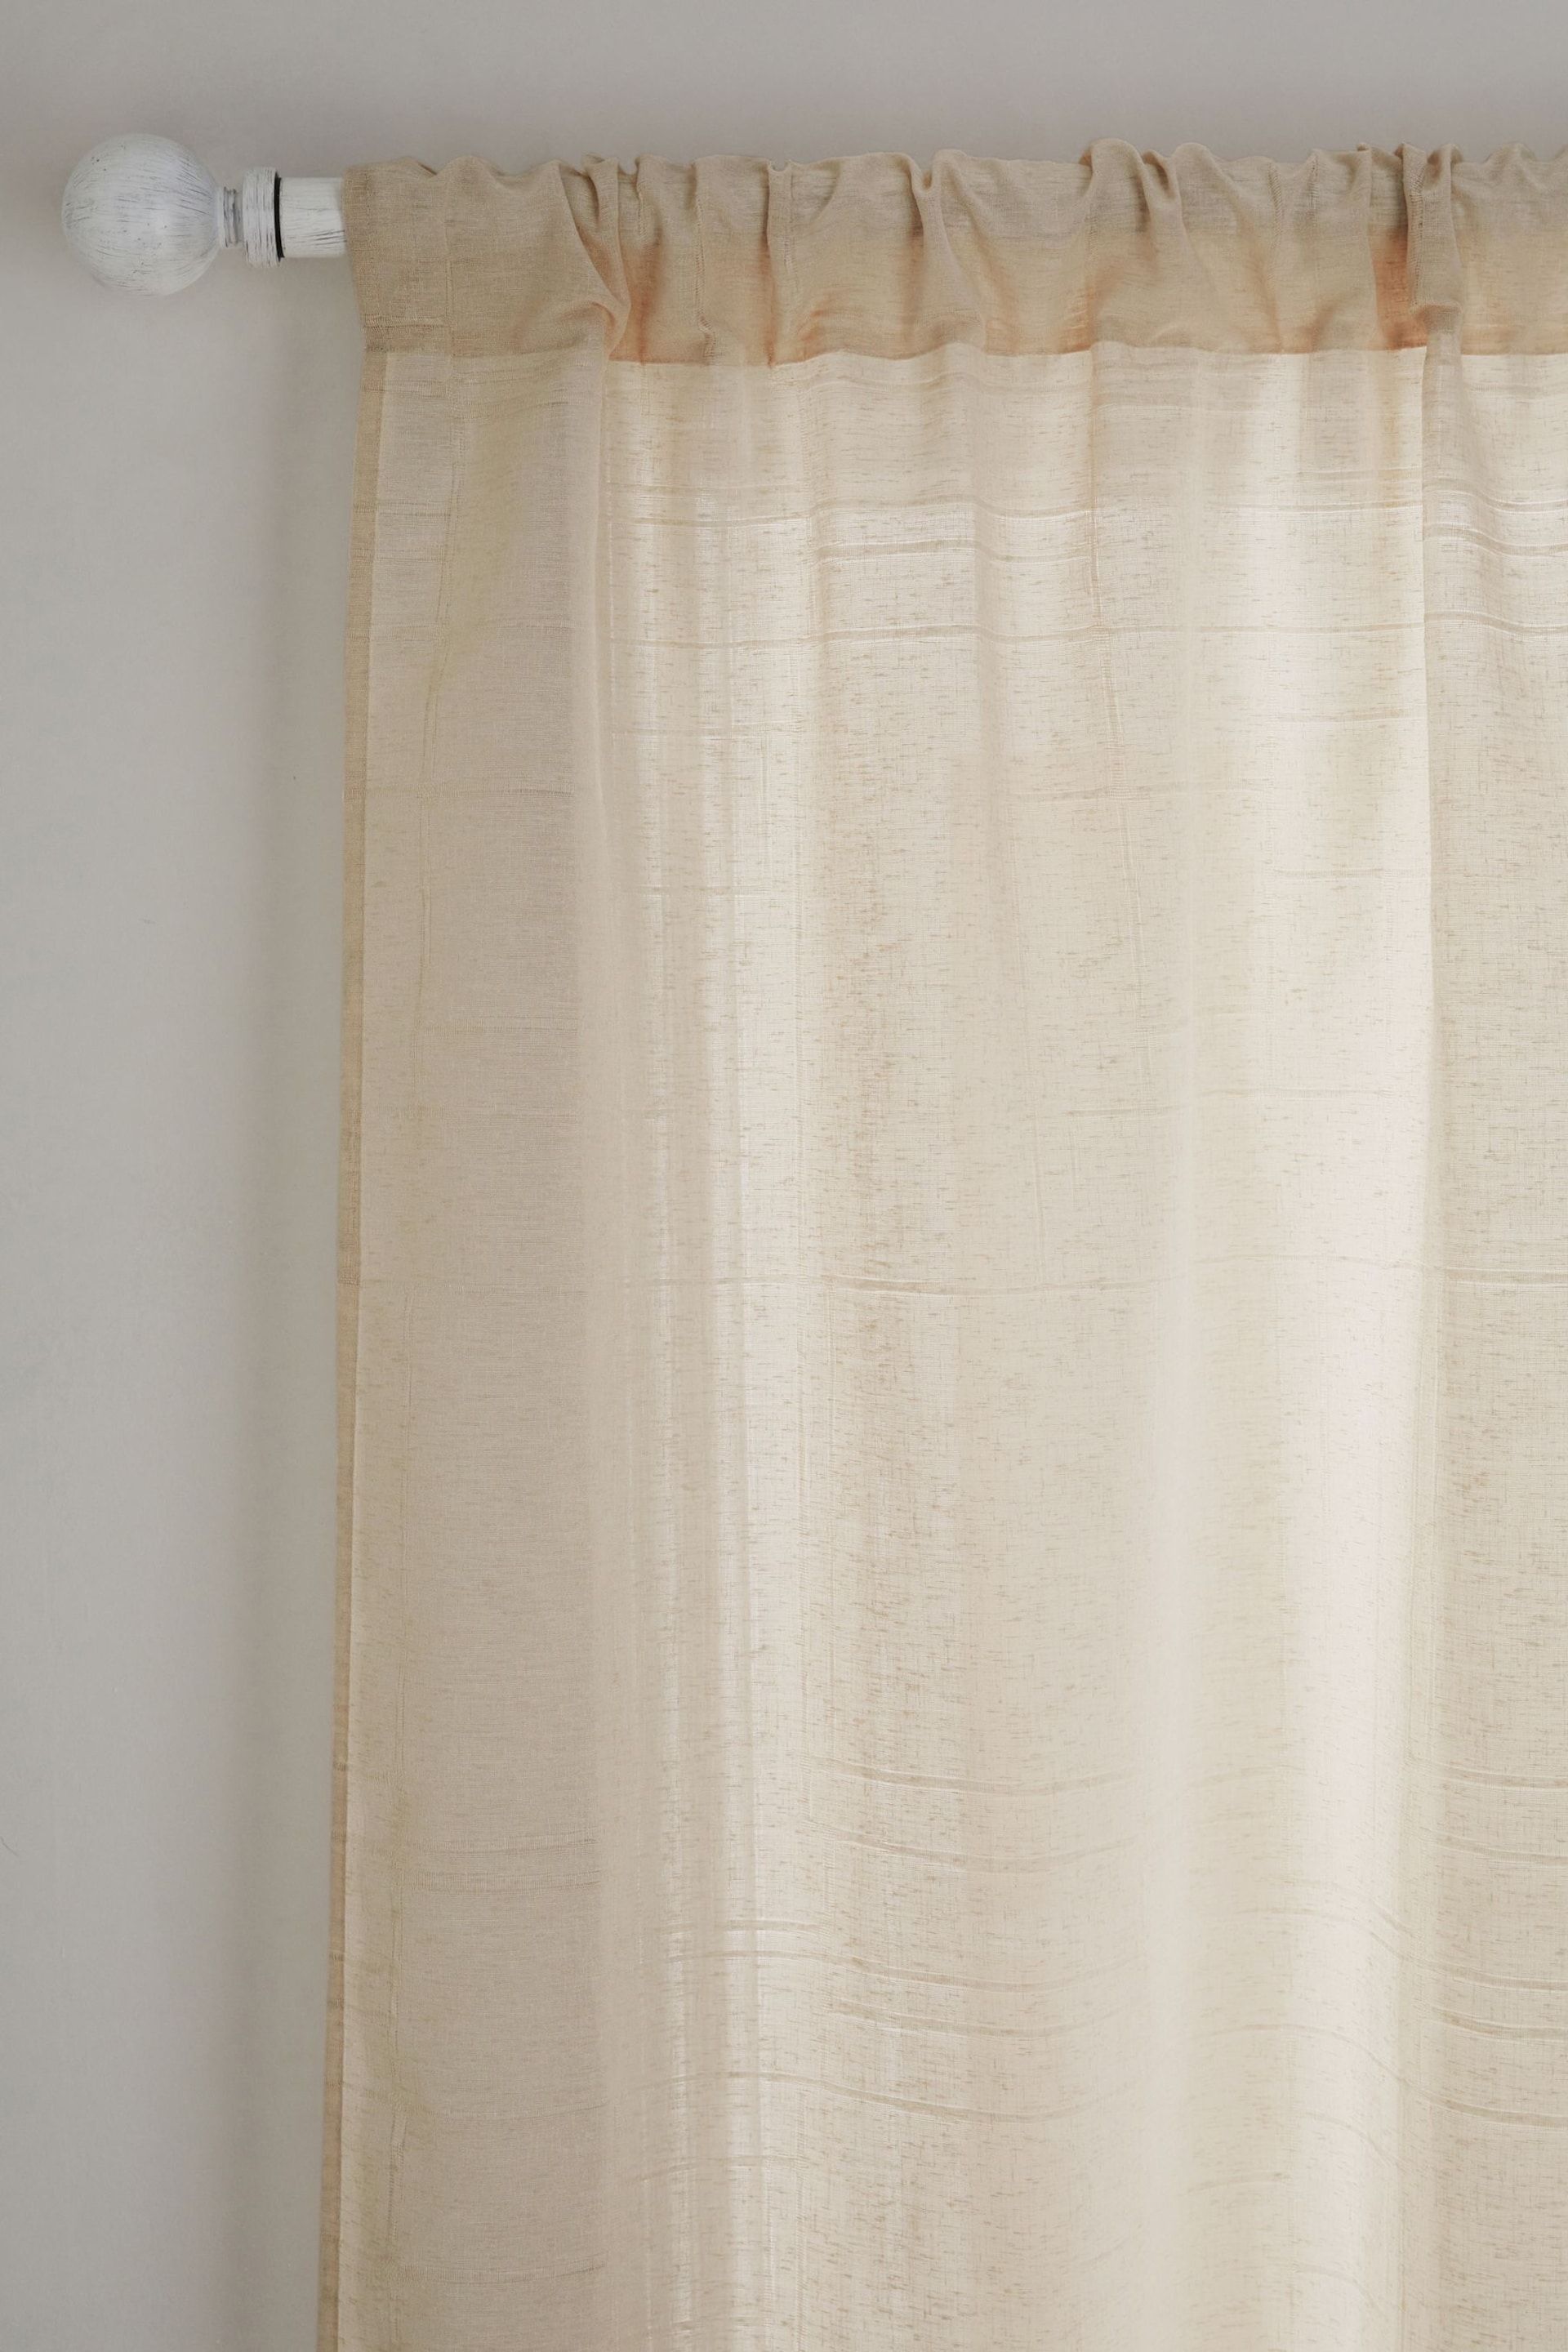 Natural Textured Voile Slot Top Unlined Sheer Panel Curtain - Image 4 of 5